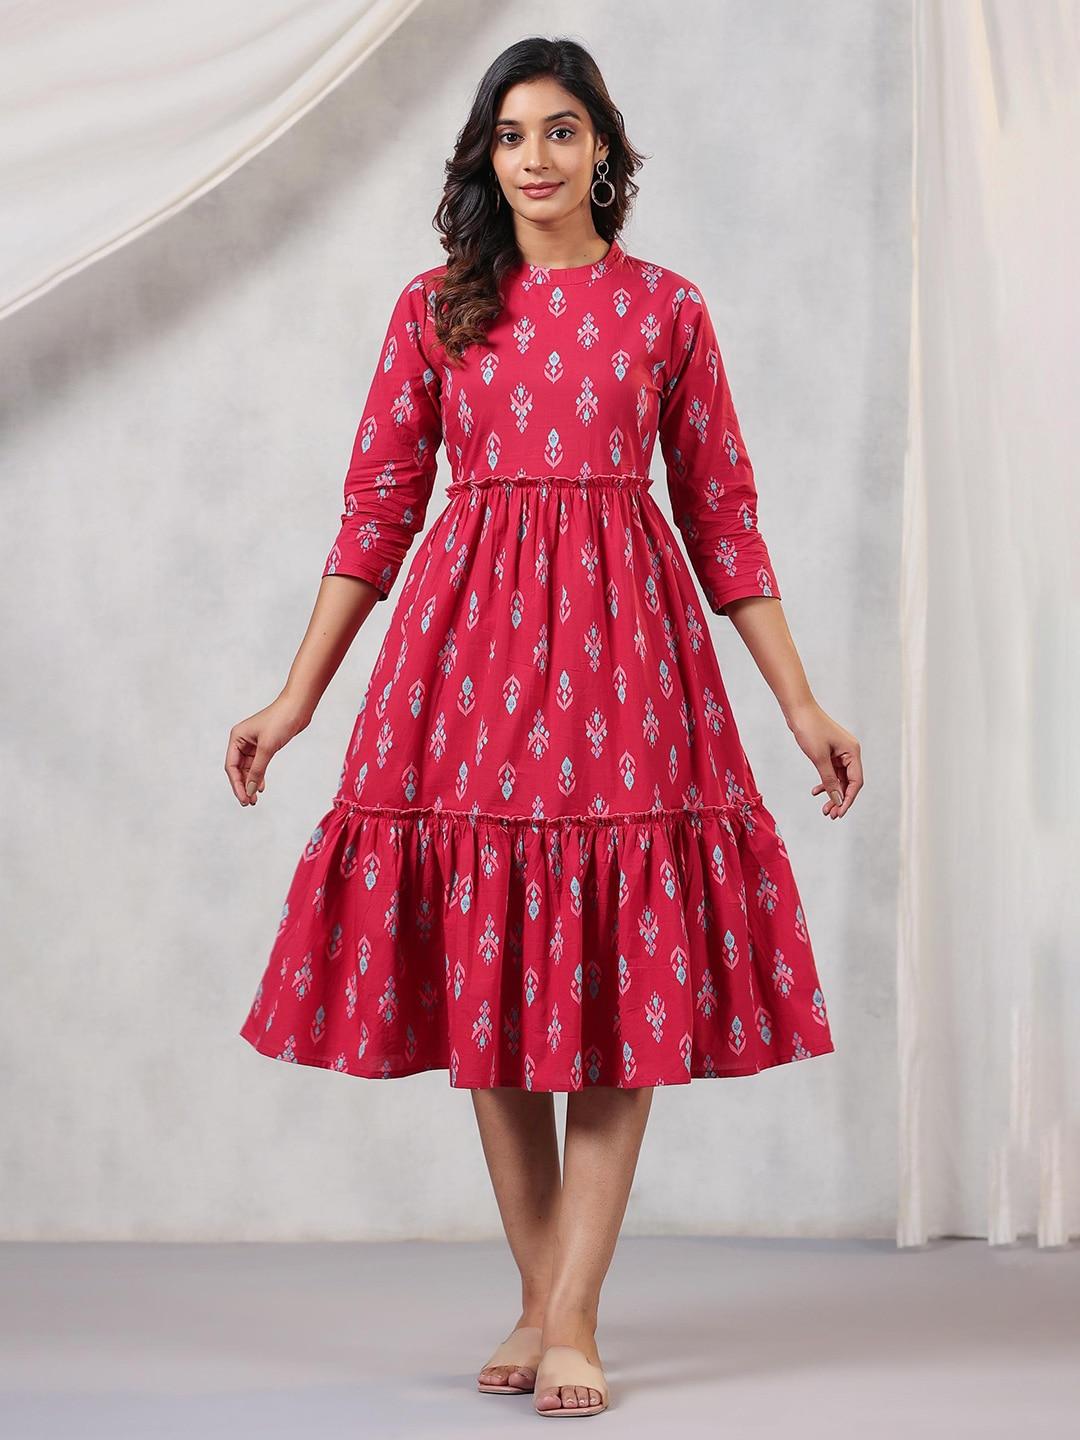 amirah s red floral print fit & flare dress